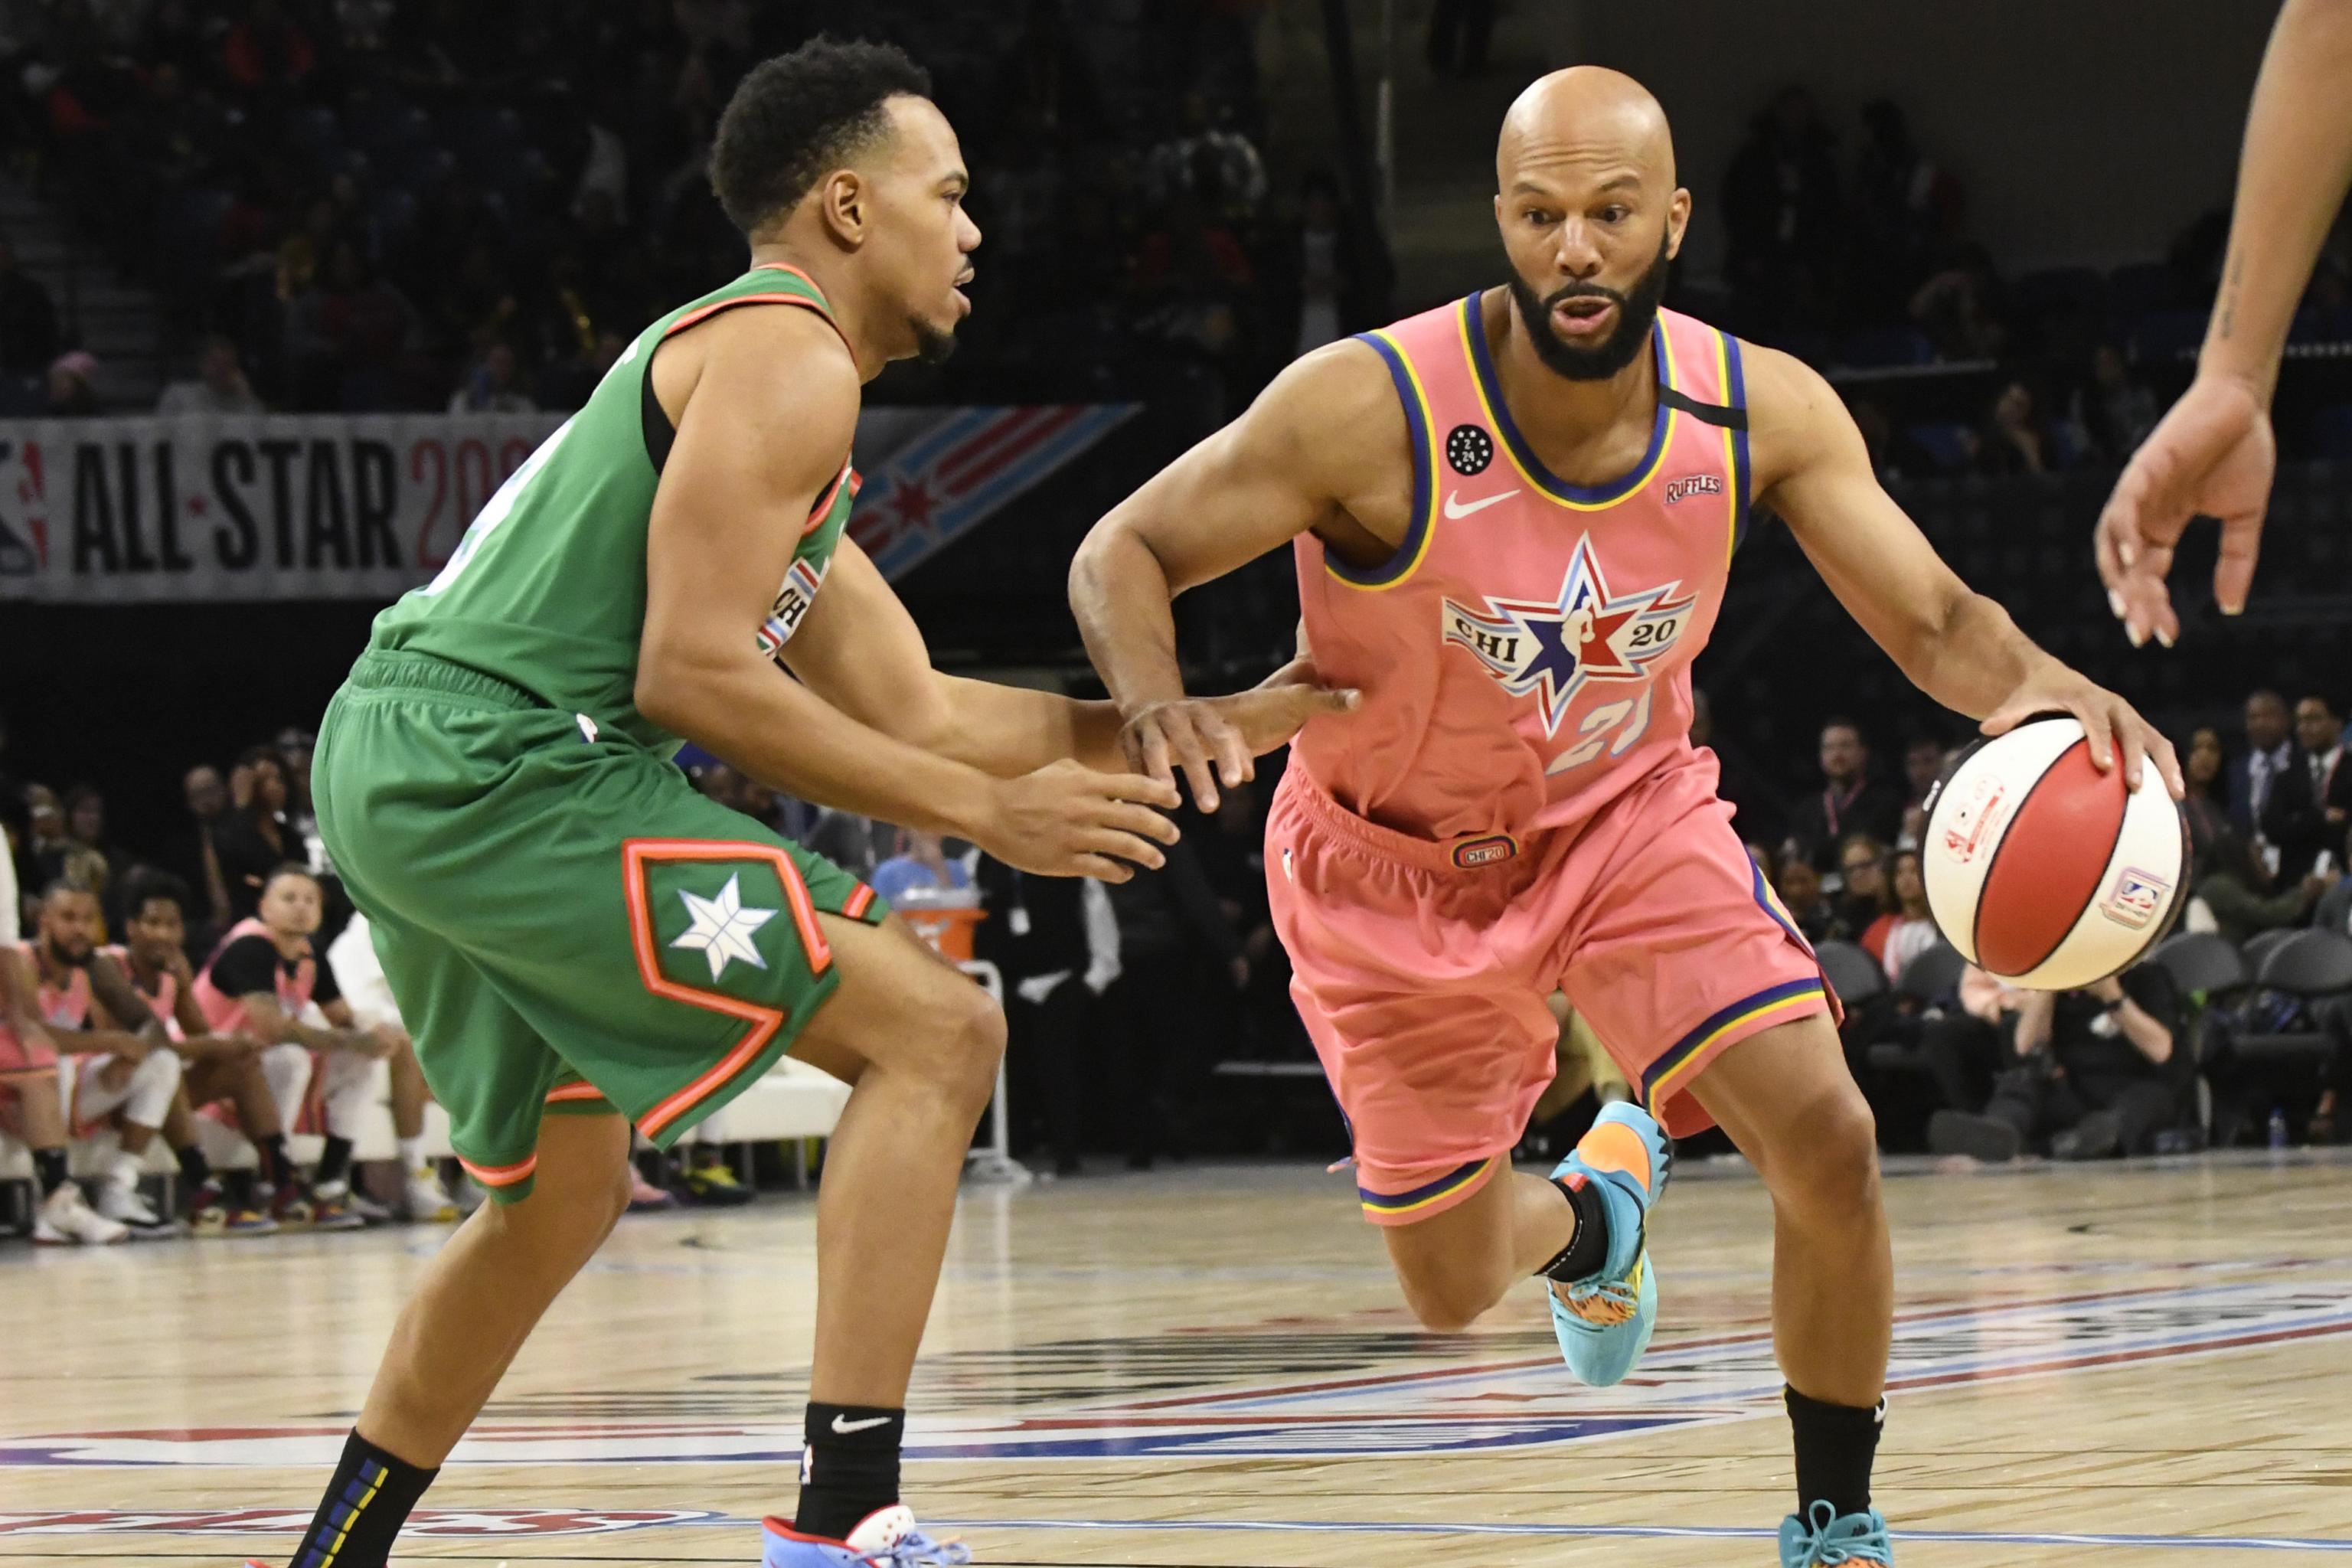 Nba Celebrity All Star Game 2020 Final Score Highlights And Comments Bleacher Report Latest News Videos And Highlights